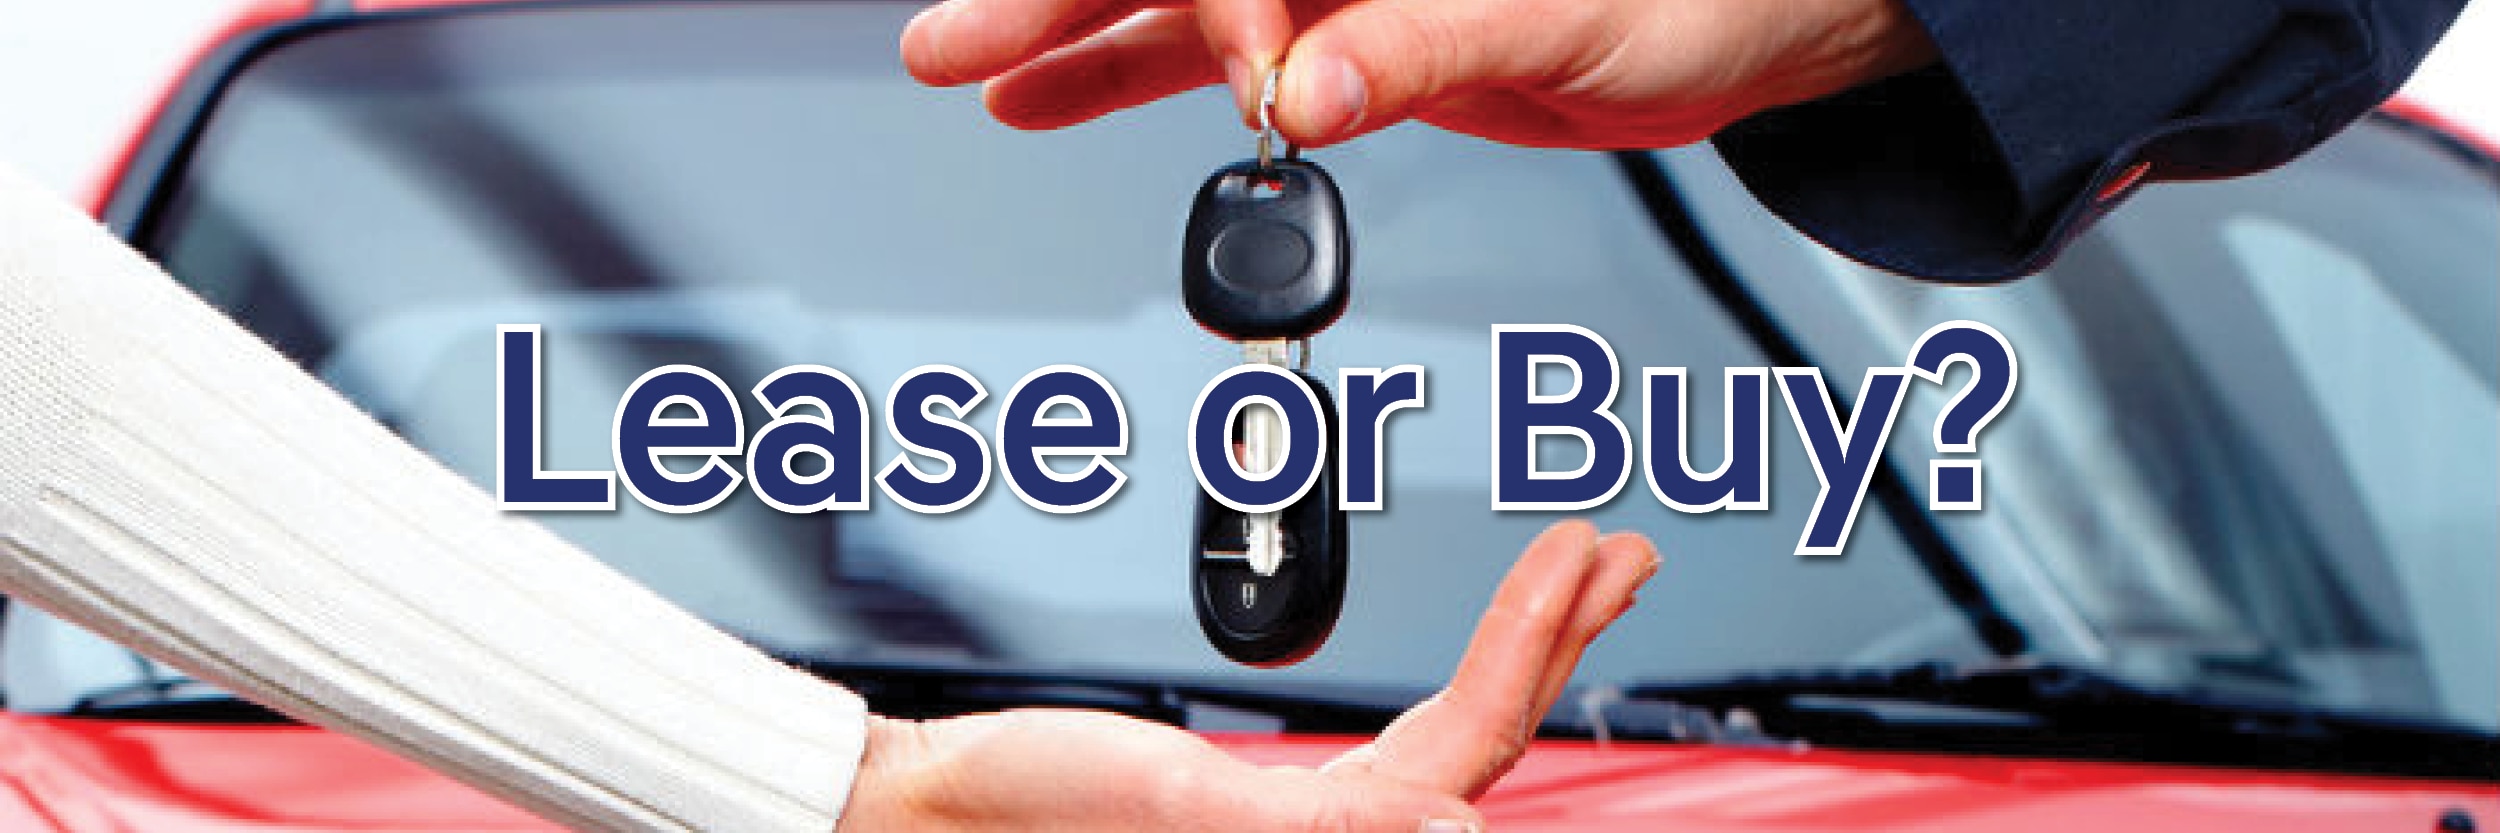 Lease or Buy CarBuying Guide Toyota of Keene